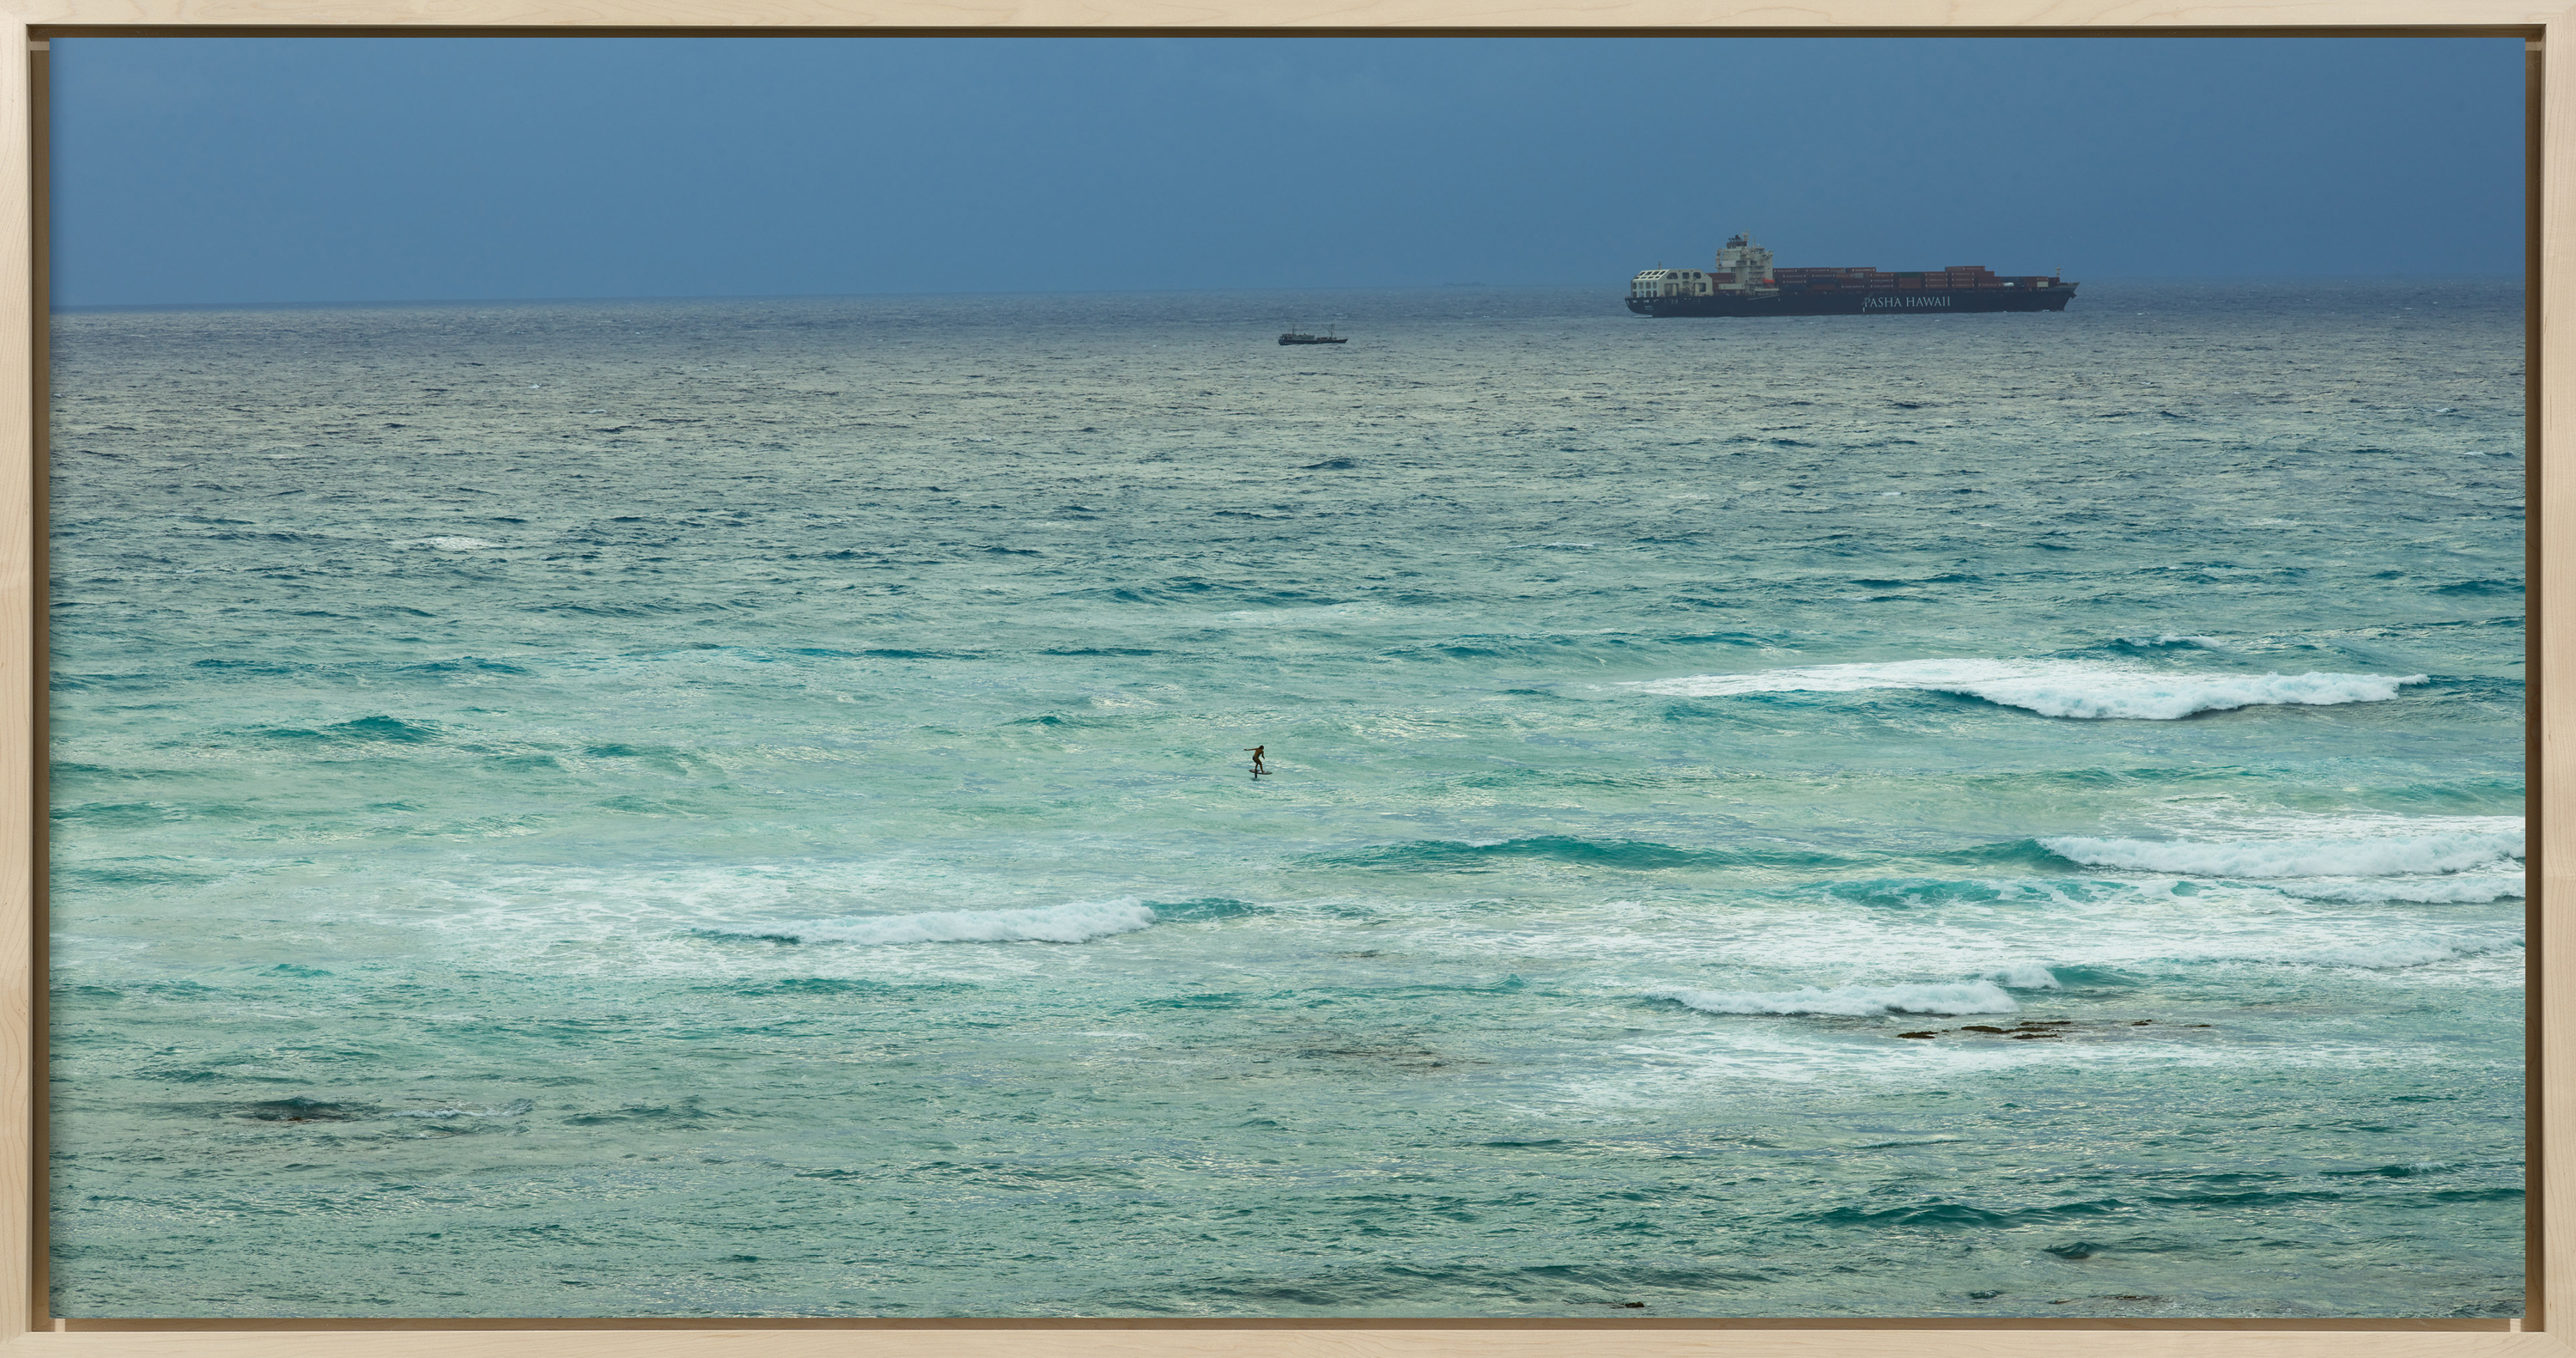 Color photograph of a figure on a hydrofoil surfboard in the middle of choppy blue waters with cargo ship on the horizon framed in bleached wood